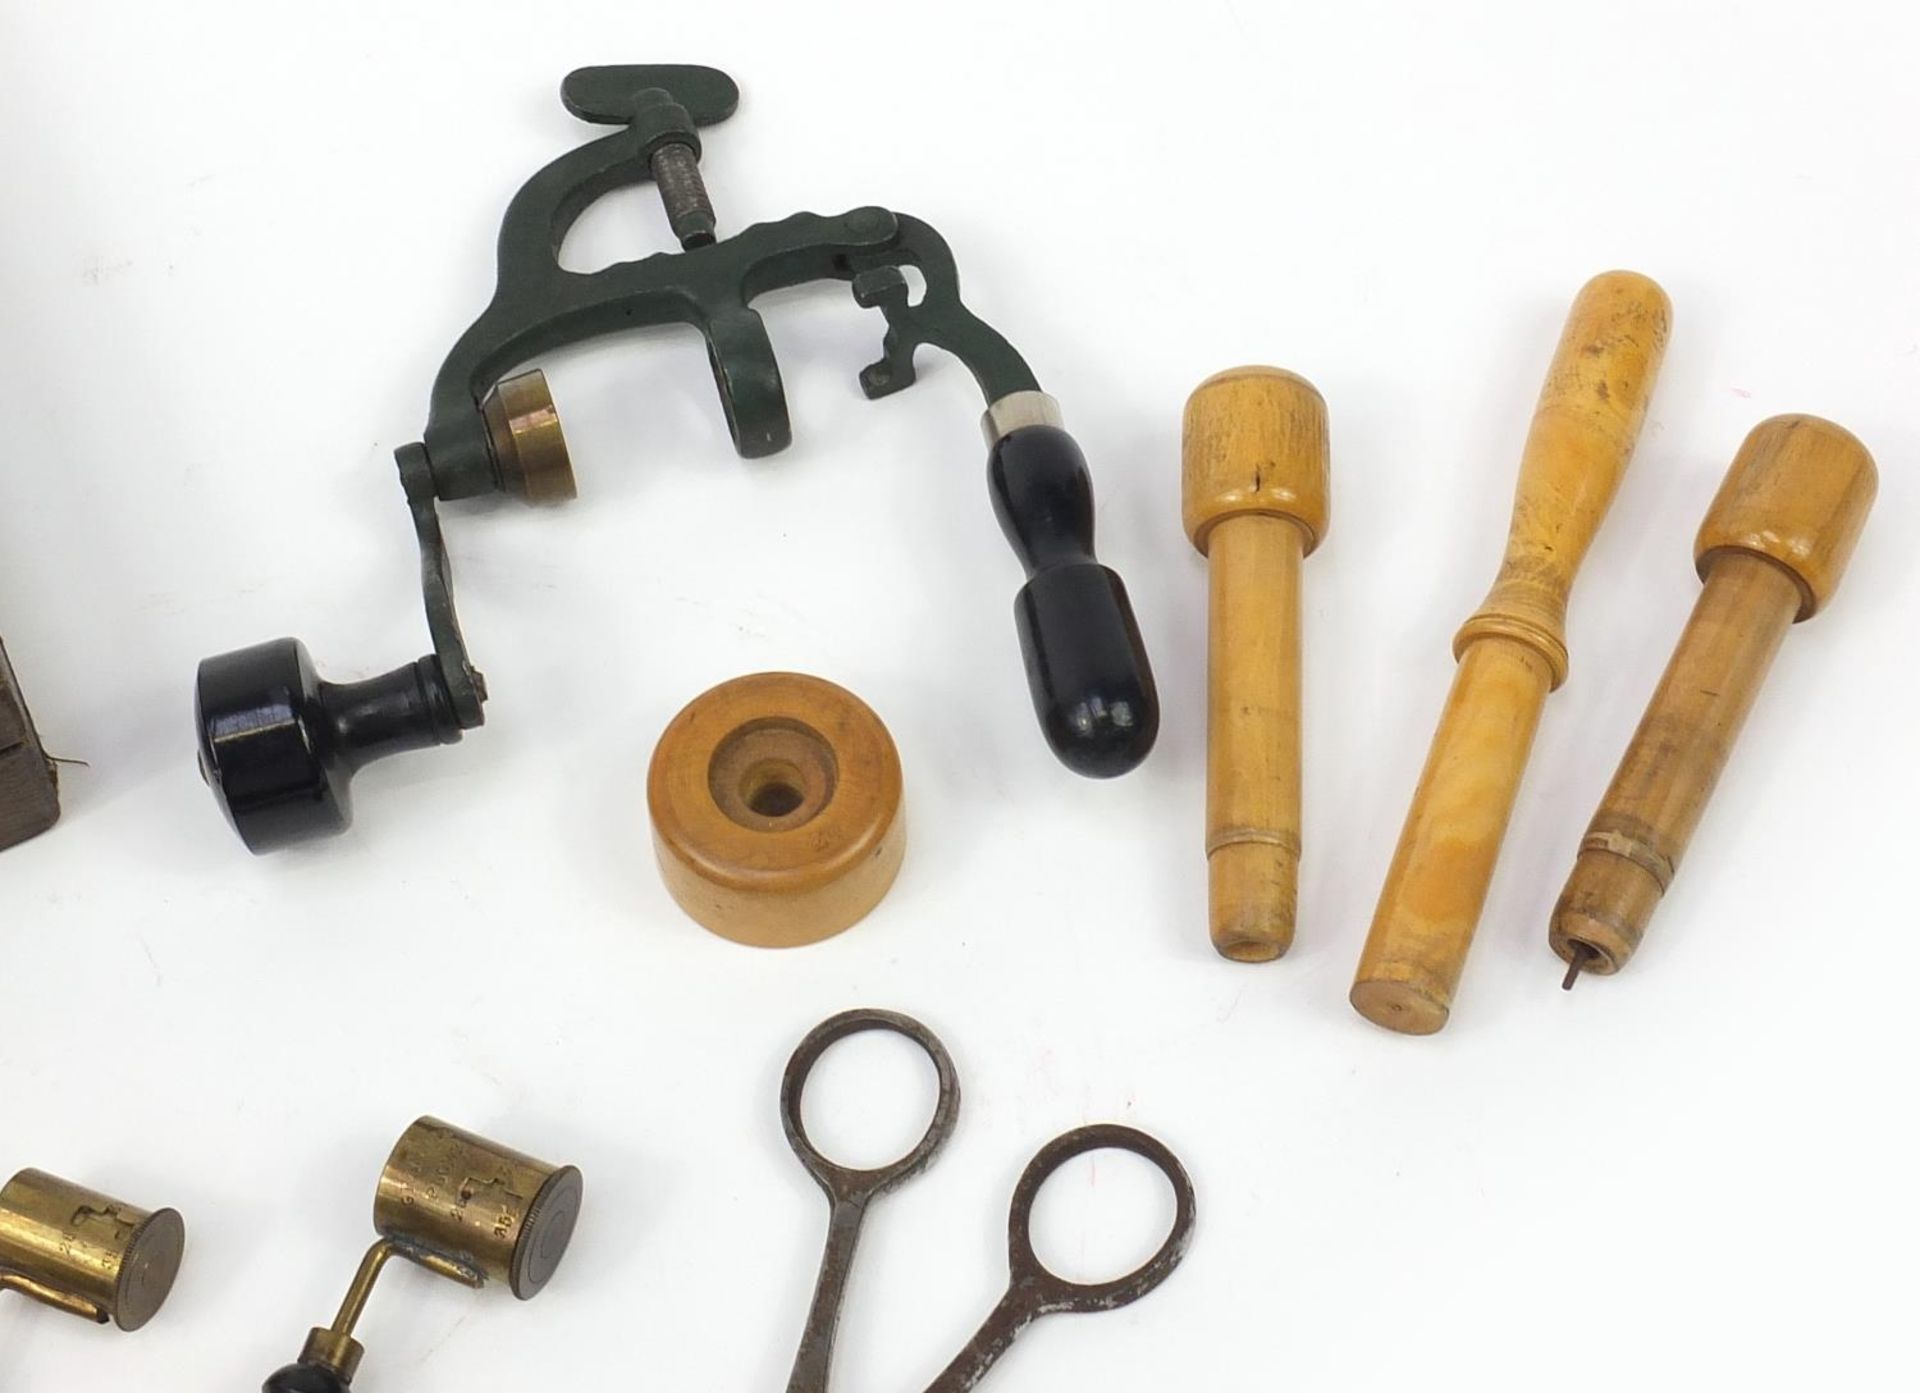 Antique gun ammunition making equipment including a cartridge maker, clamps and scissors housed in a - Image 2 of 5